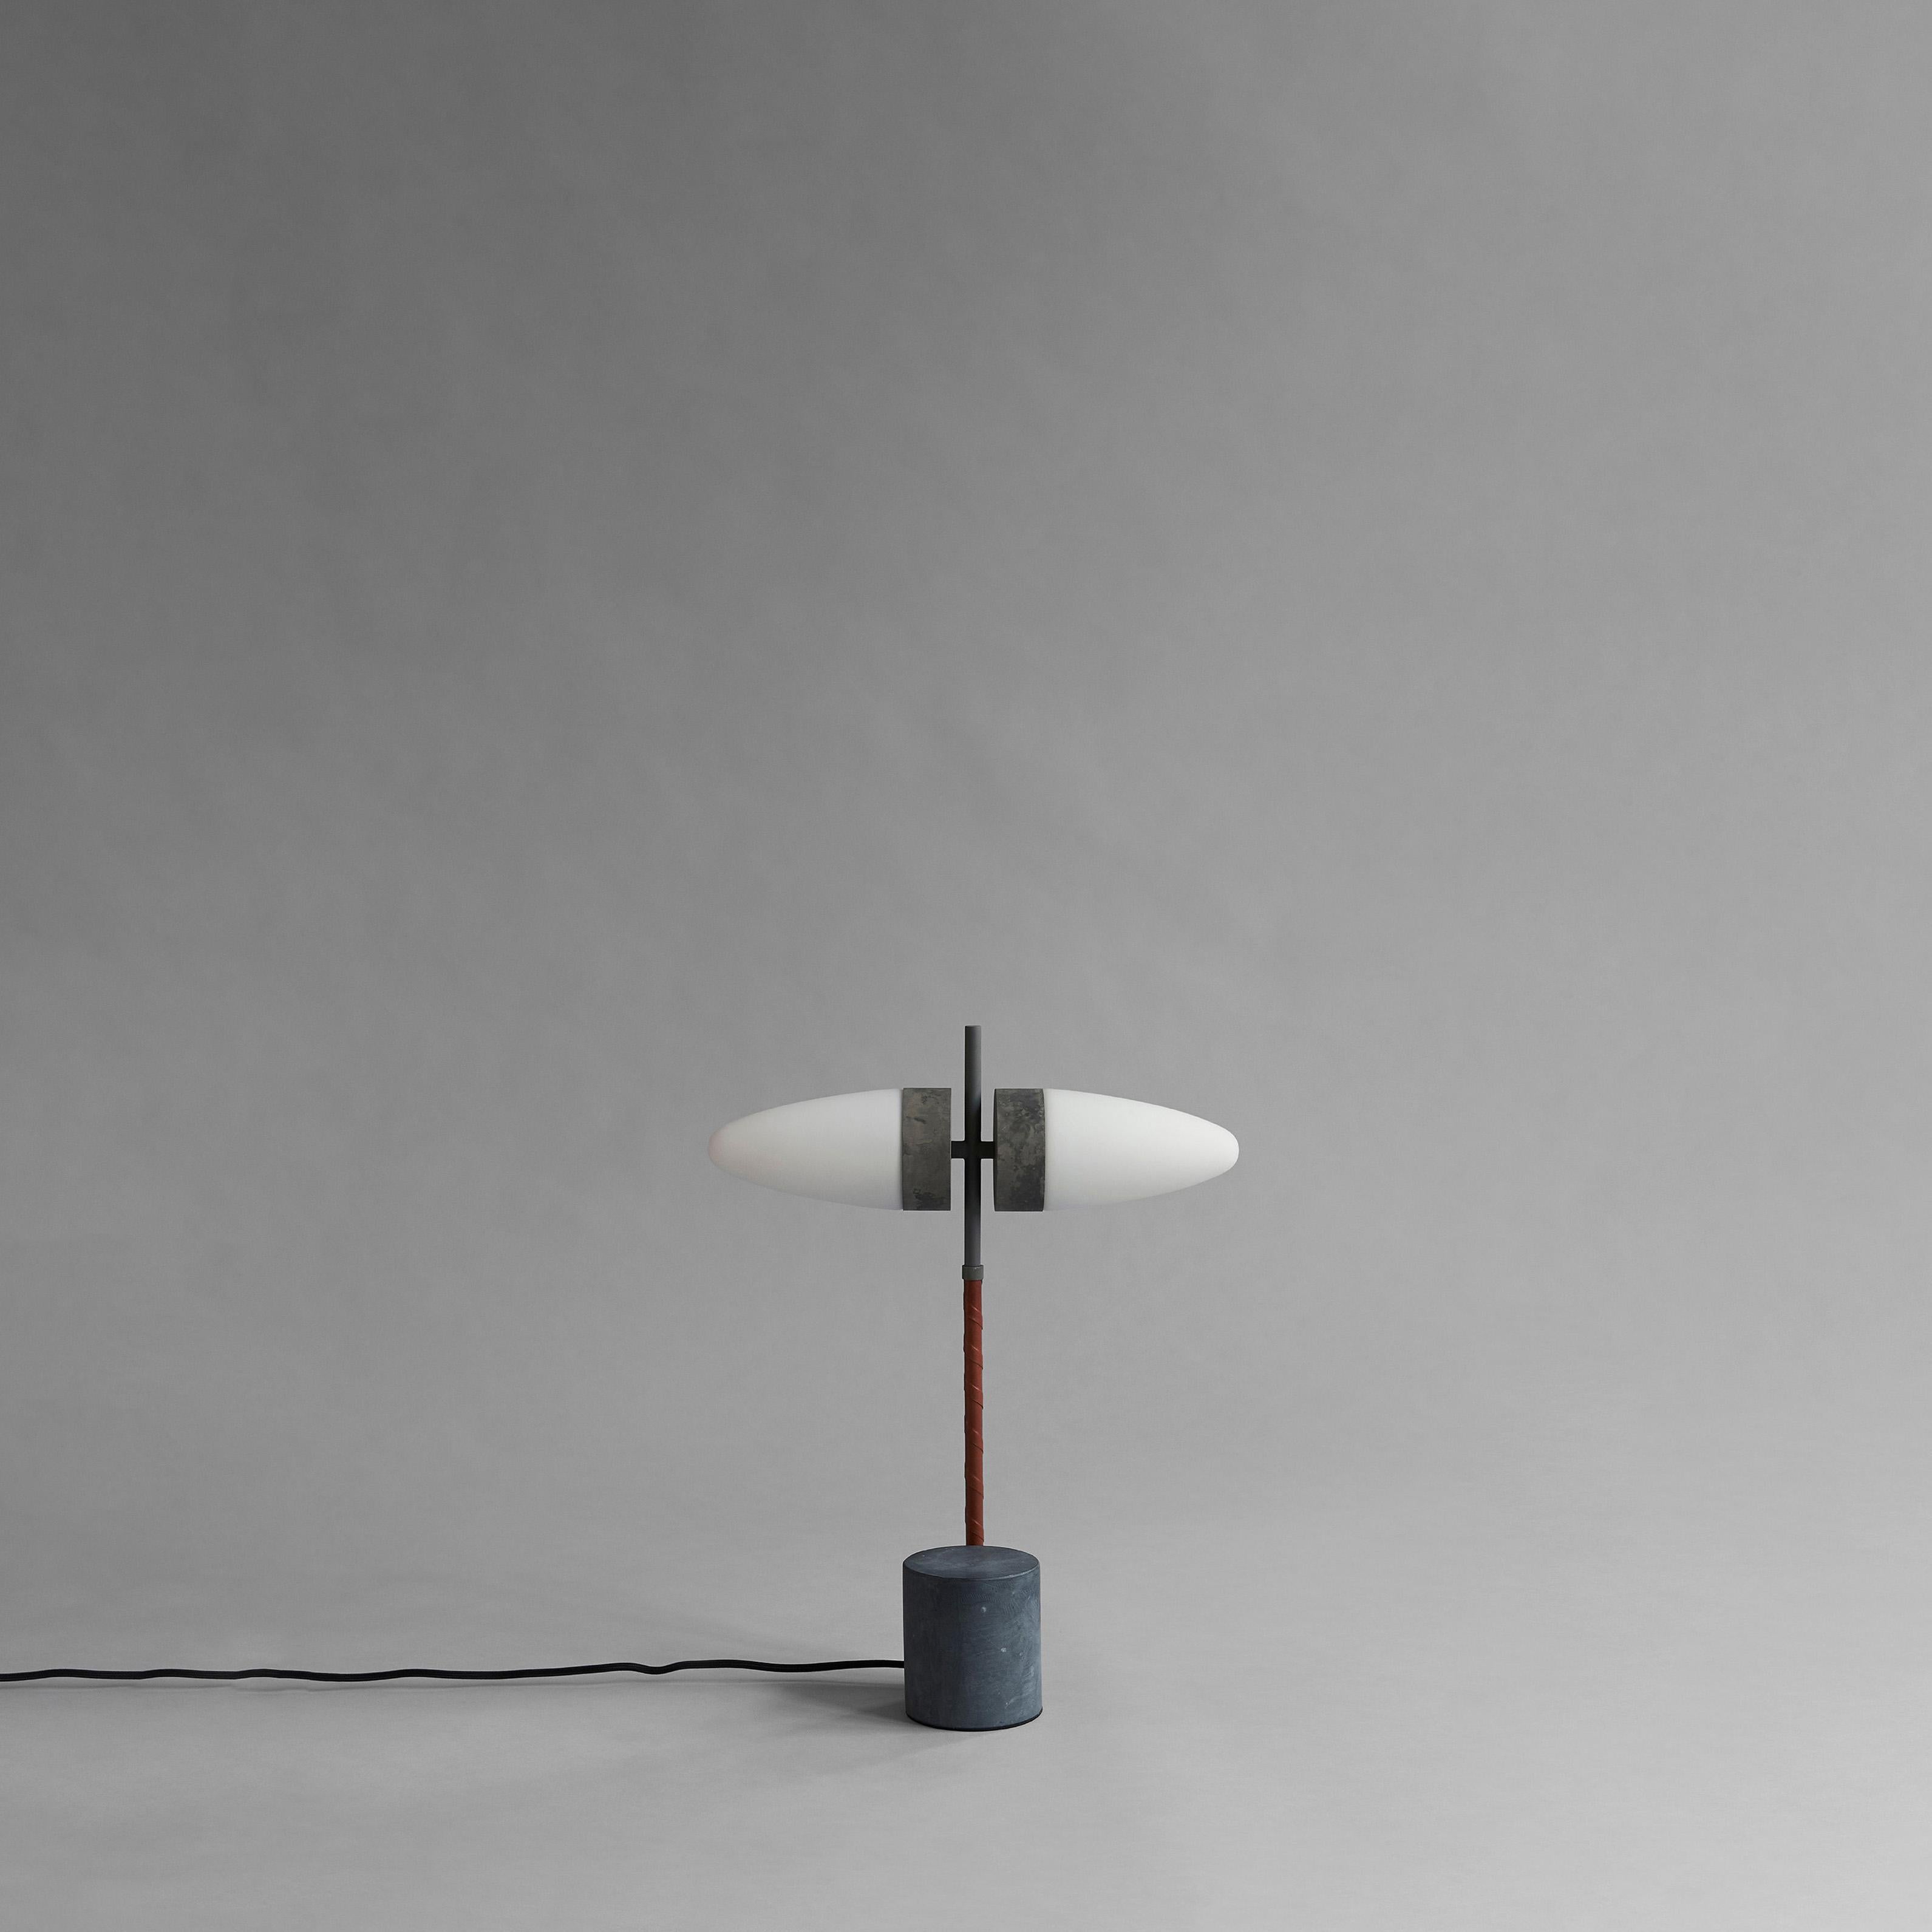 Bull table lamp by 101 Copenhagen.
Designed by Kristian Sofus Hansen & Tommy Hyldahl.
Dimensions: L 38 x W 12 x H 50 cm.
Cable length: 200 cm.

Materials: metal: aliminum / oxidized
Opal glass / white
Leather / Cognac
Cable: Fabric covered cable